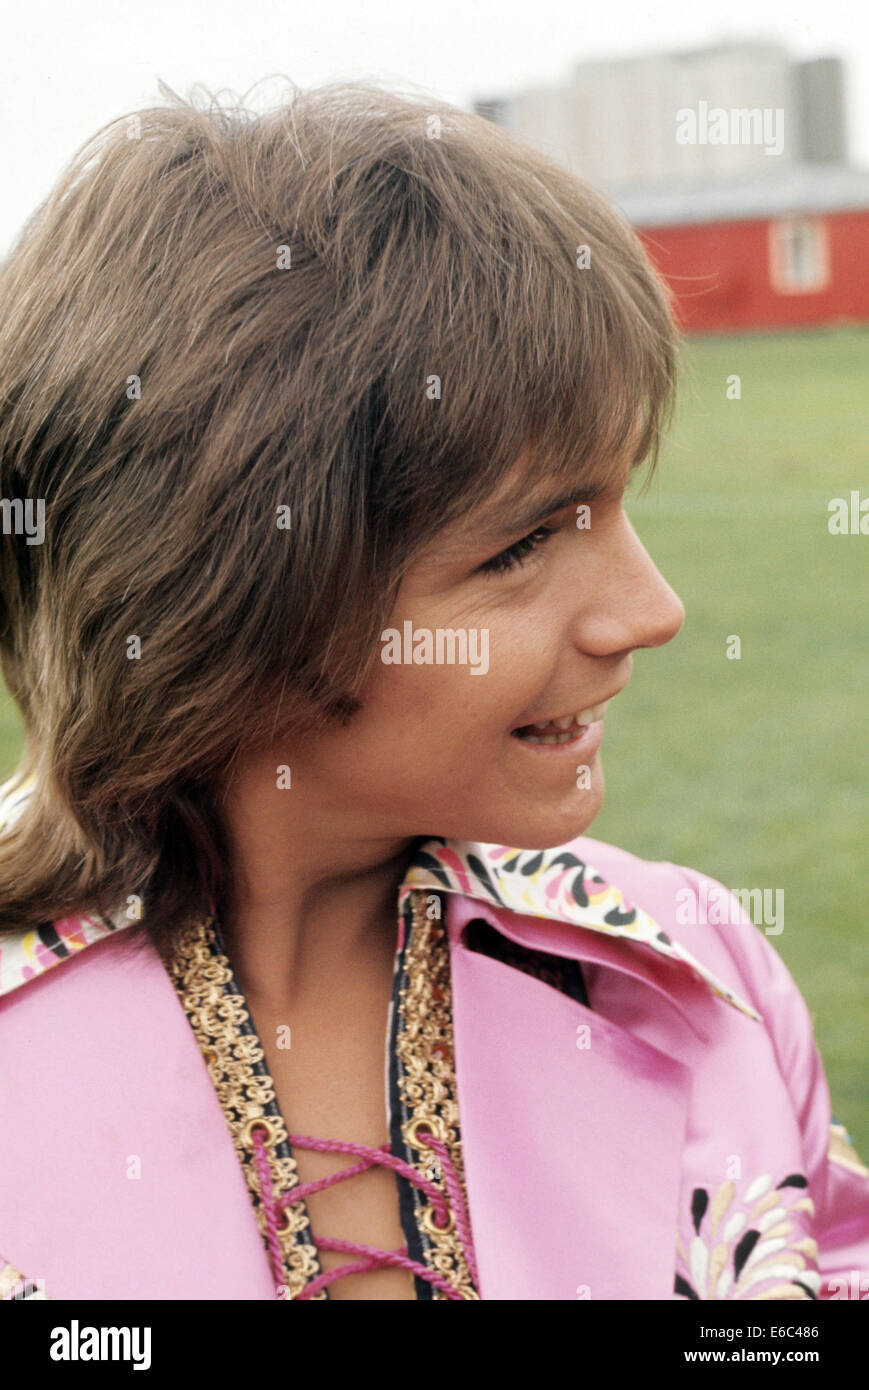 DAVID CASSIDY  American pop singer about 1975 Stock Photo